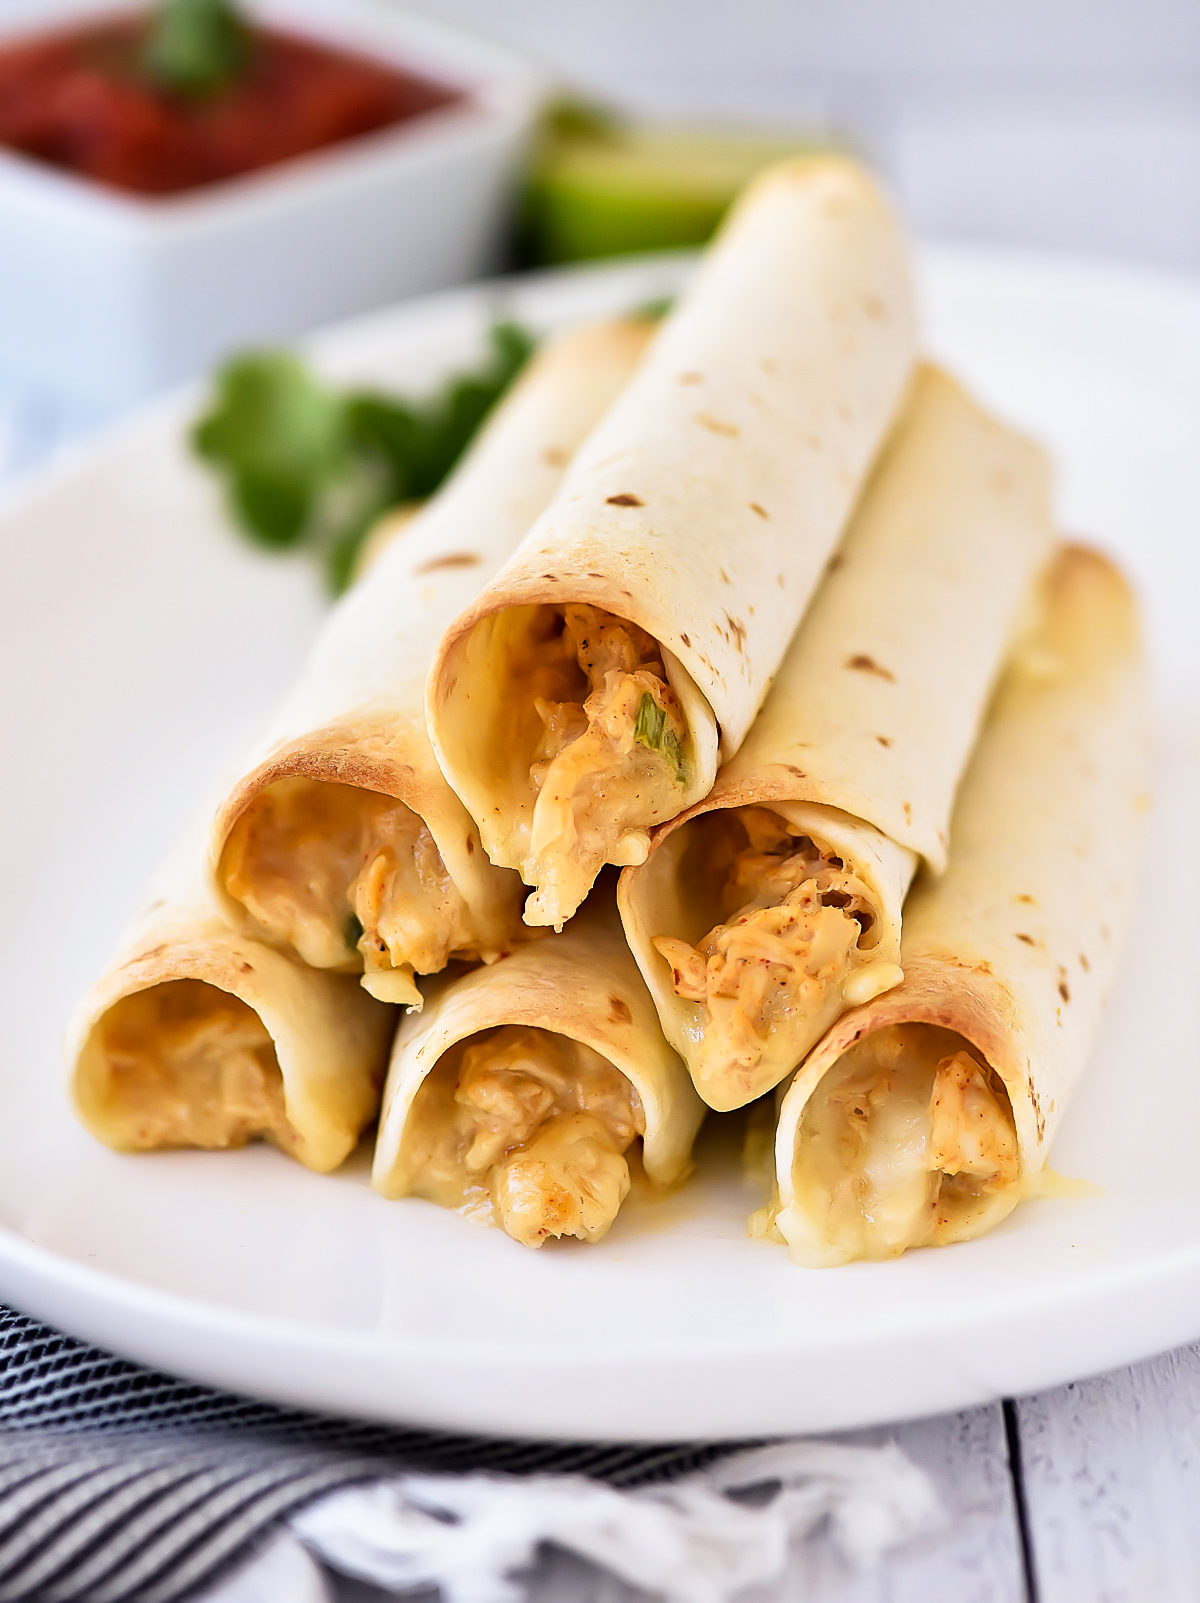 Baked Chicken Taquitos are a crispy flour tortilla wrapped around a warm center of creamy and cheesy Mexican chicken.